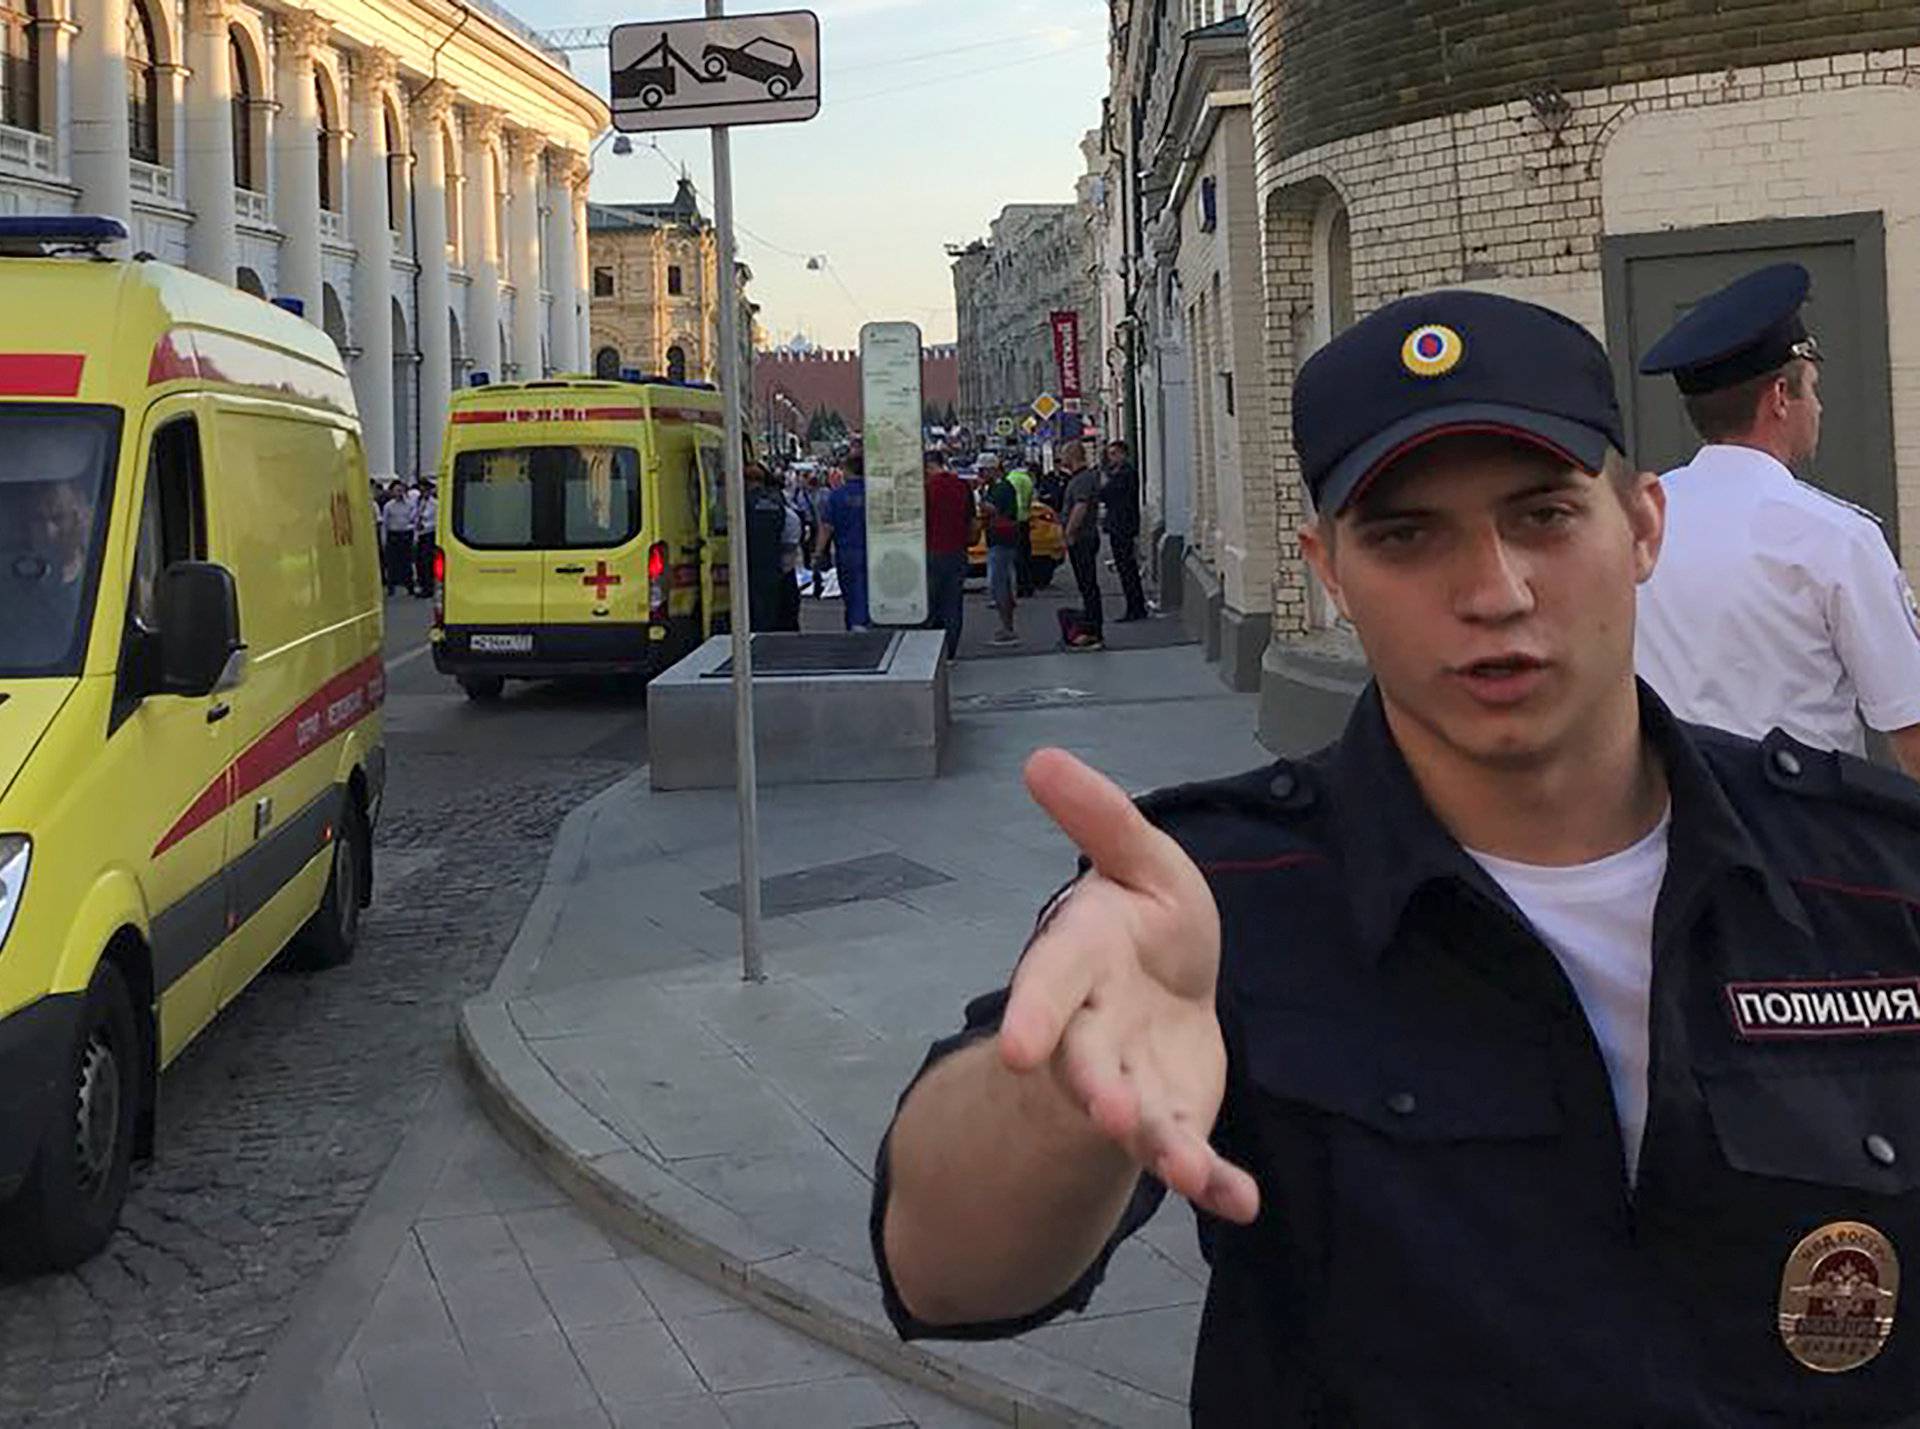 A police officer blocks the way as ambulances are parked near a damaged taxi, which ran into a crowd of people in central Moscow